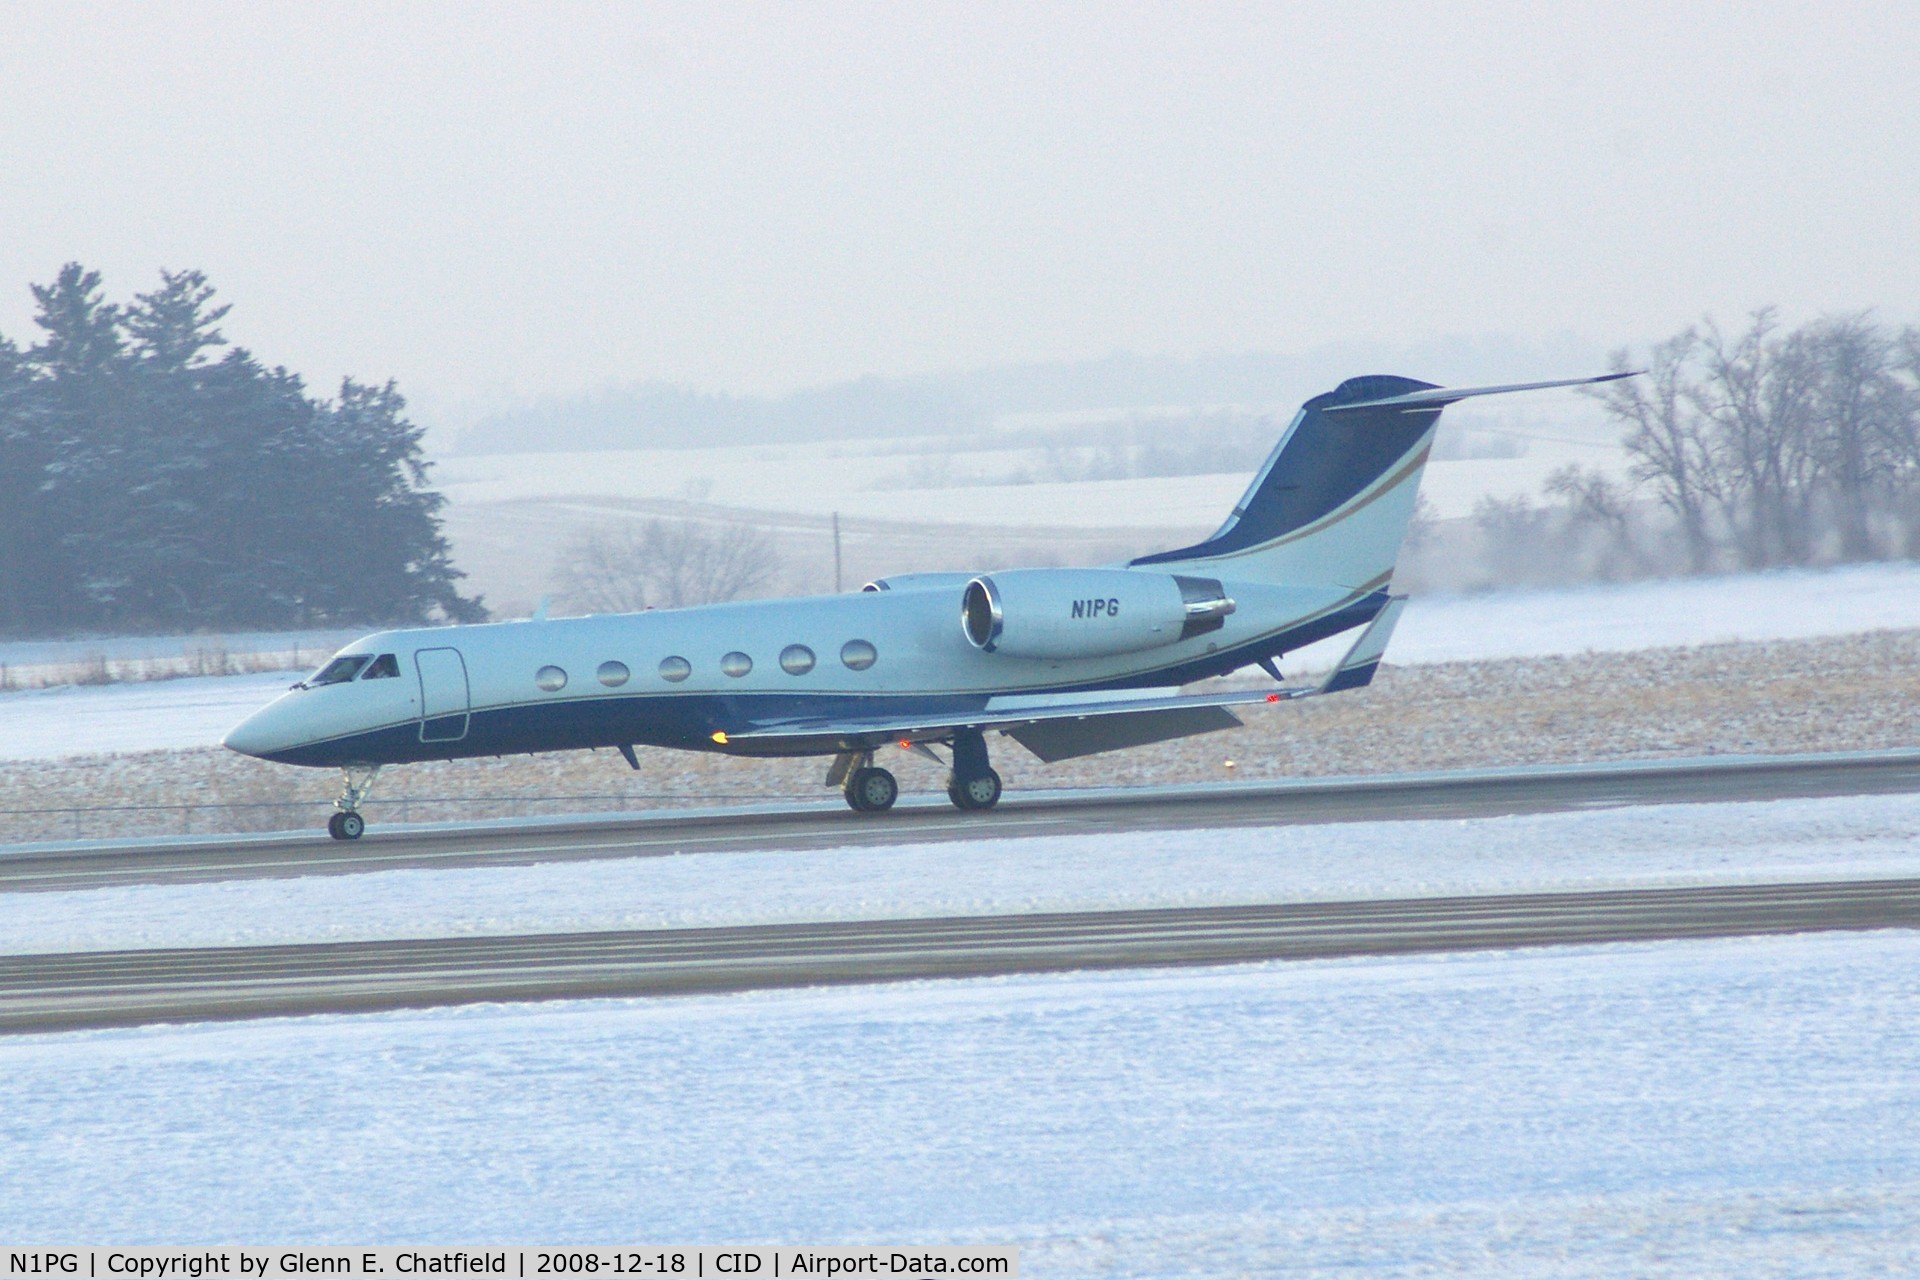 N1PG, 1999 Gulfstream Aerospace G-IV C/N 1374, Landing roll-out on Runway 9, very early in the morning